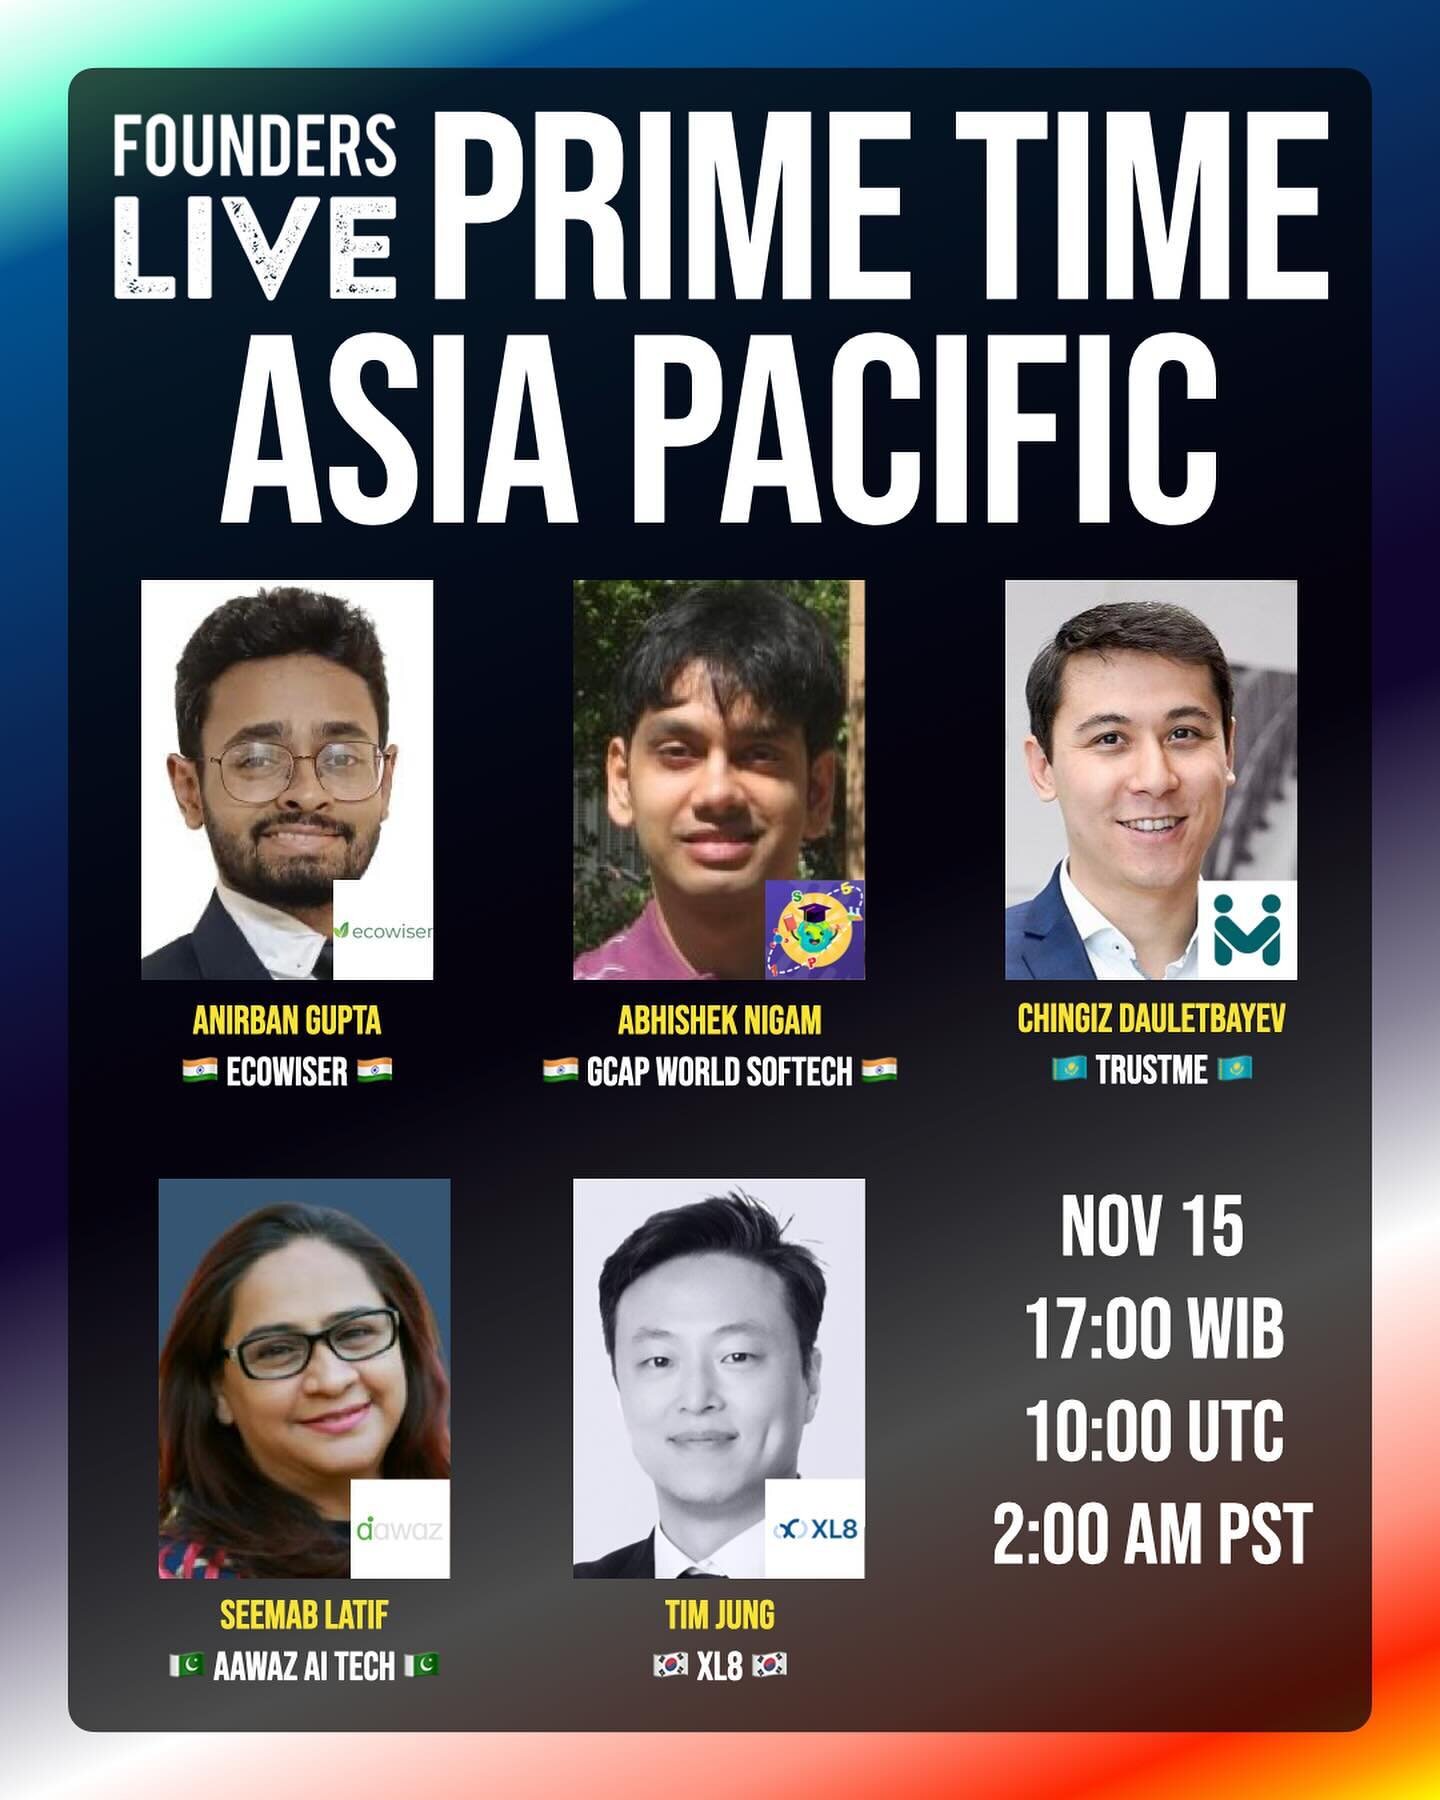 Join us Wednesday as Prime Time and Global Entrepreneurship Week continue with the Asia Pacific regional finals!

Asia Pacific&rsquo;s top 5 founders and their startups:
🇮🇳&nbsp;Anirban Datta Gupta&nbsp;-&nbsp;@eco.wiser 
🇮🇳&nbsp;Abhishek Nigam&n